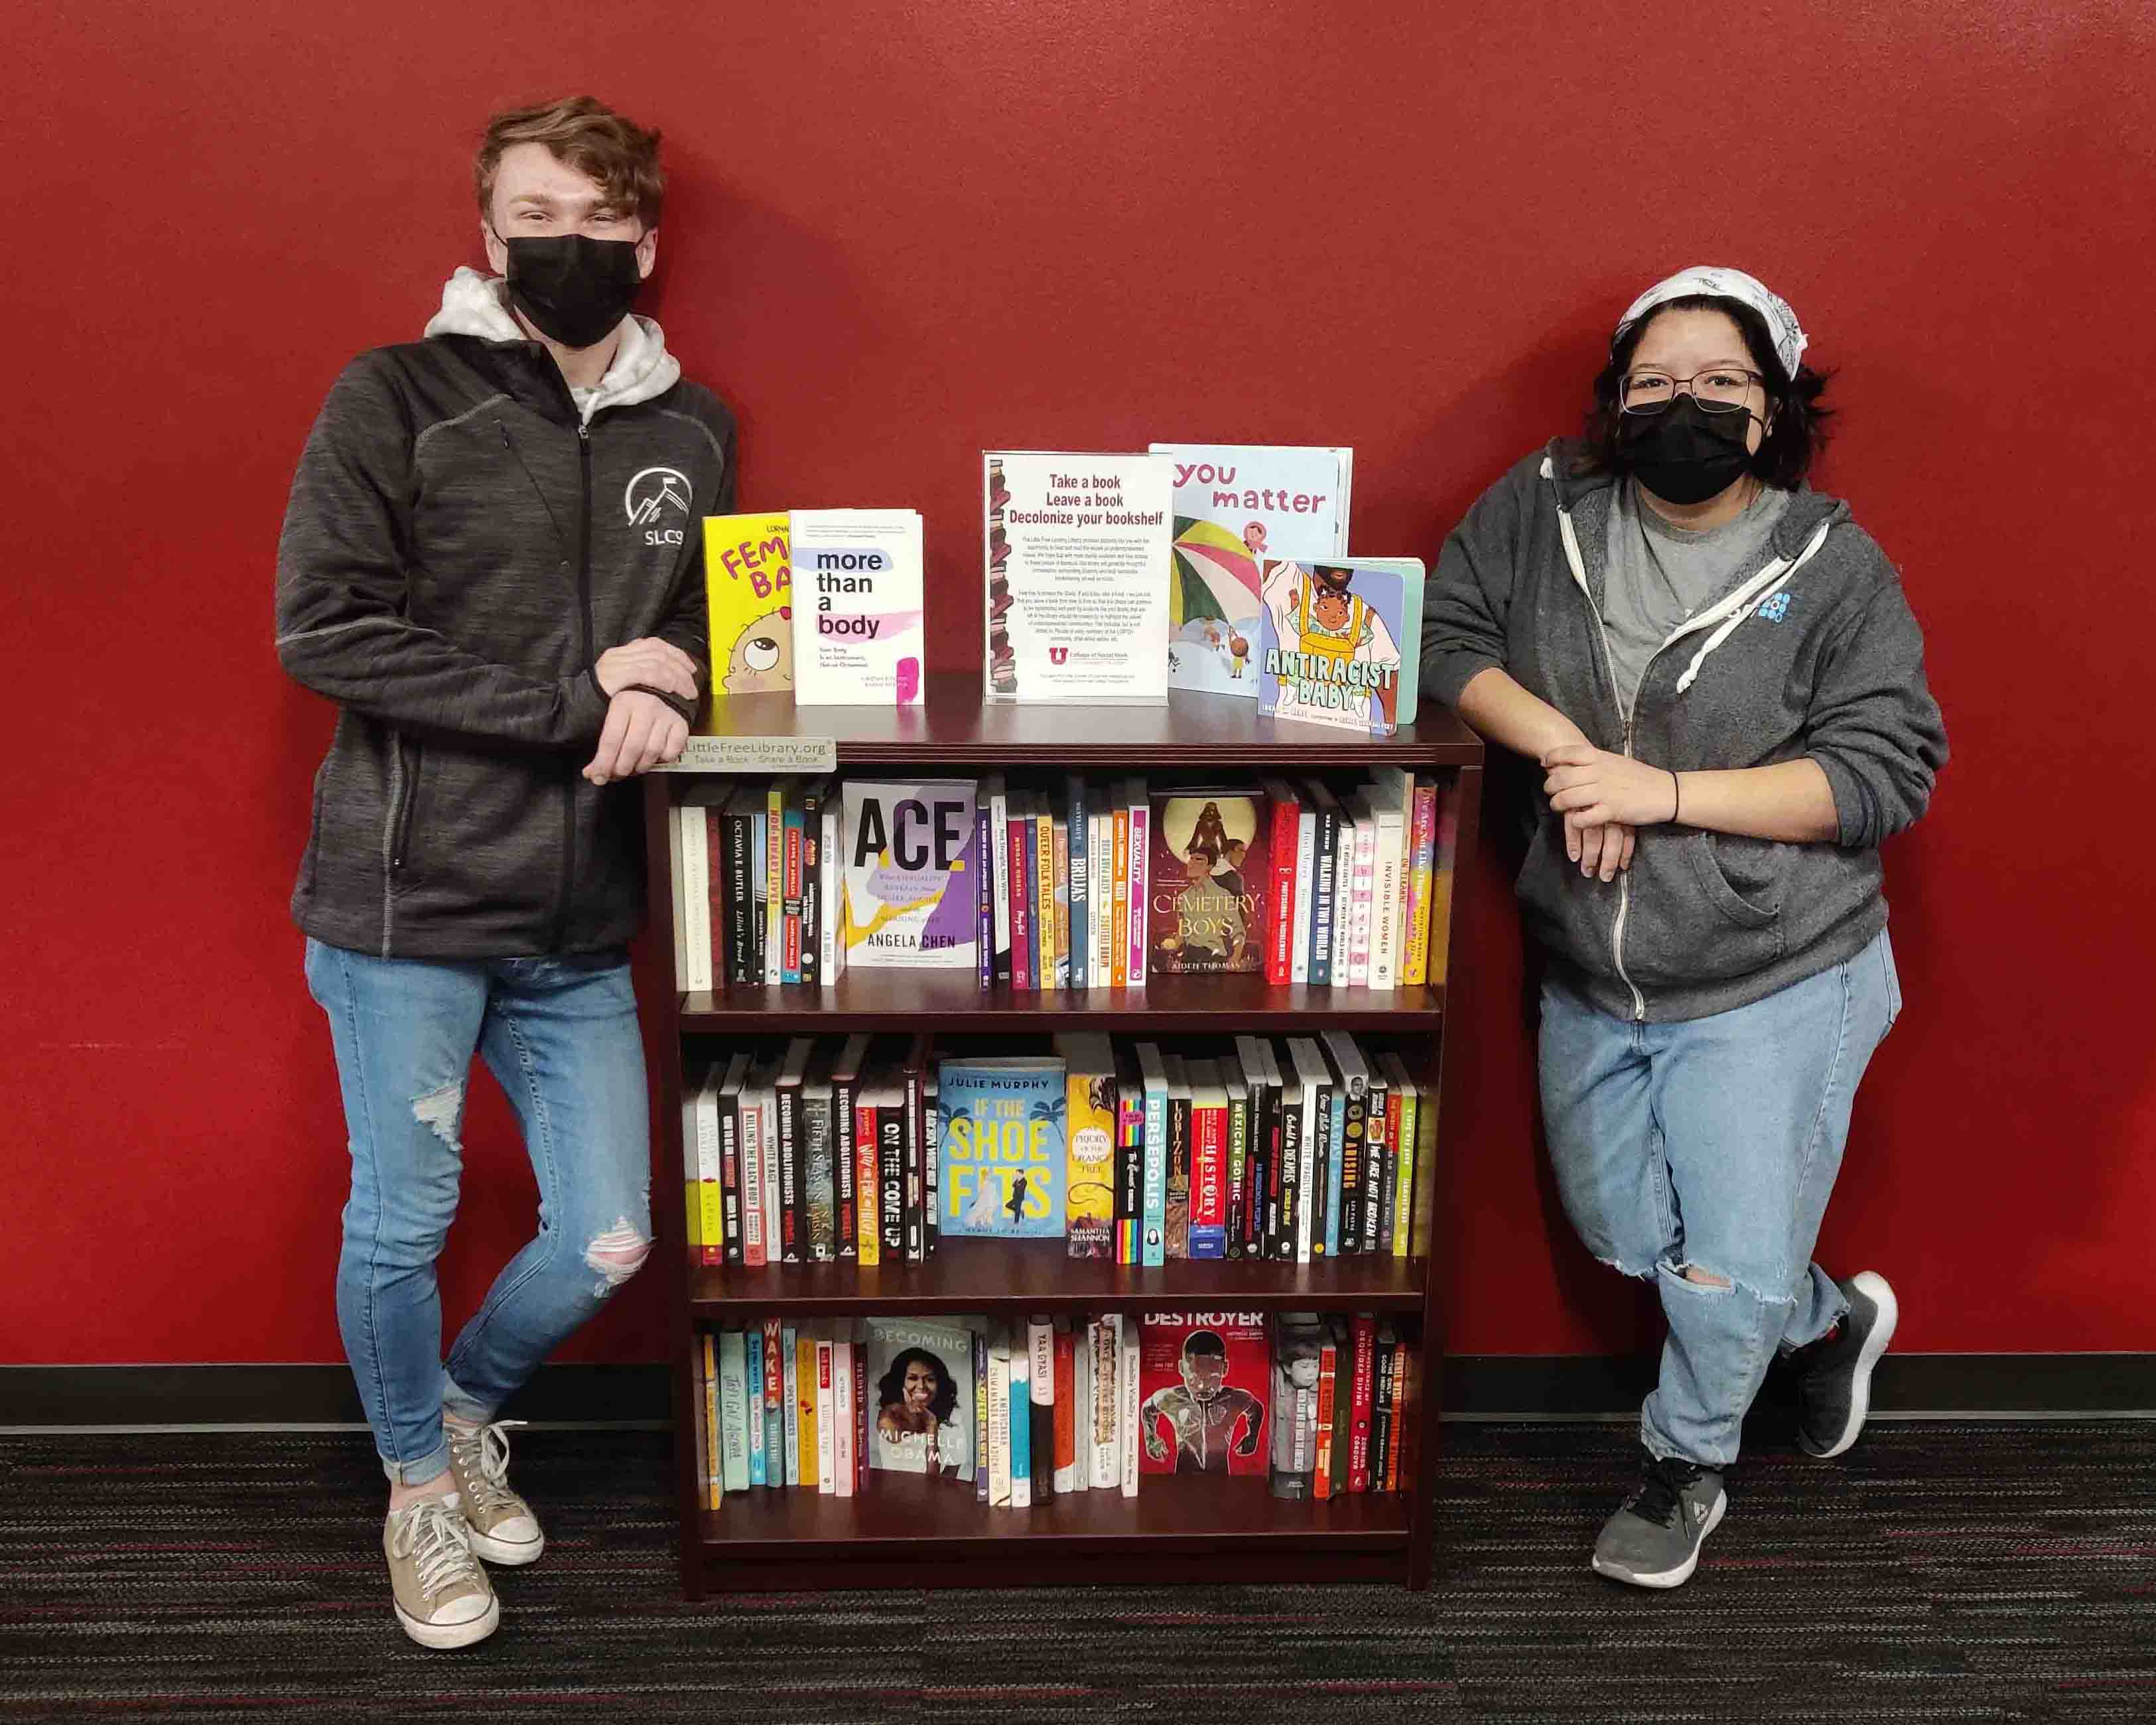 Two masked college students stand on opposite ends of a bookshelf full of books